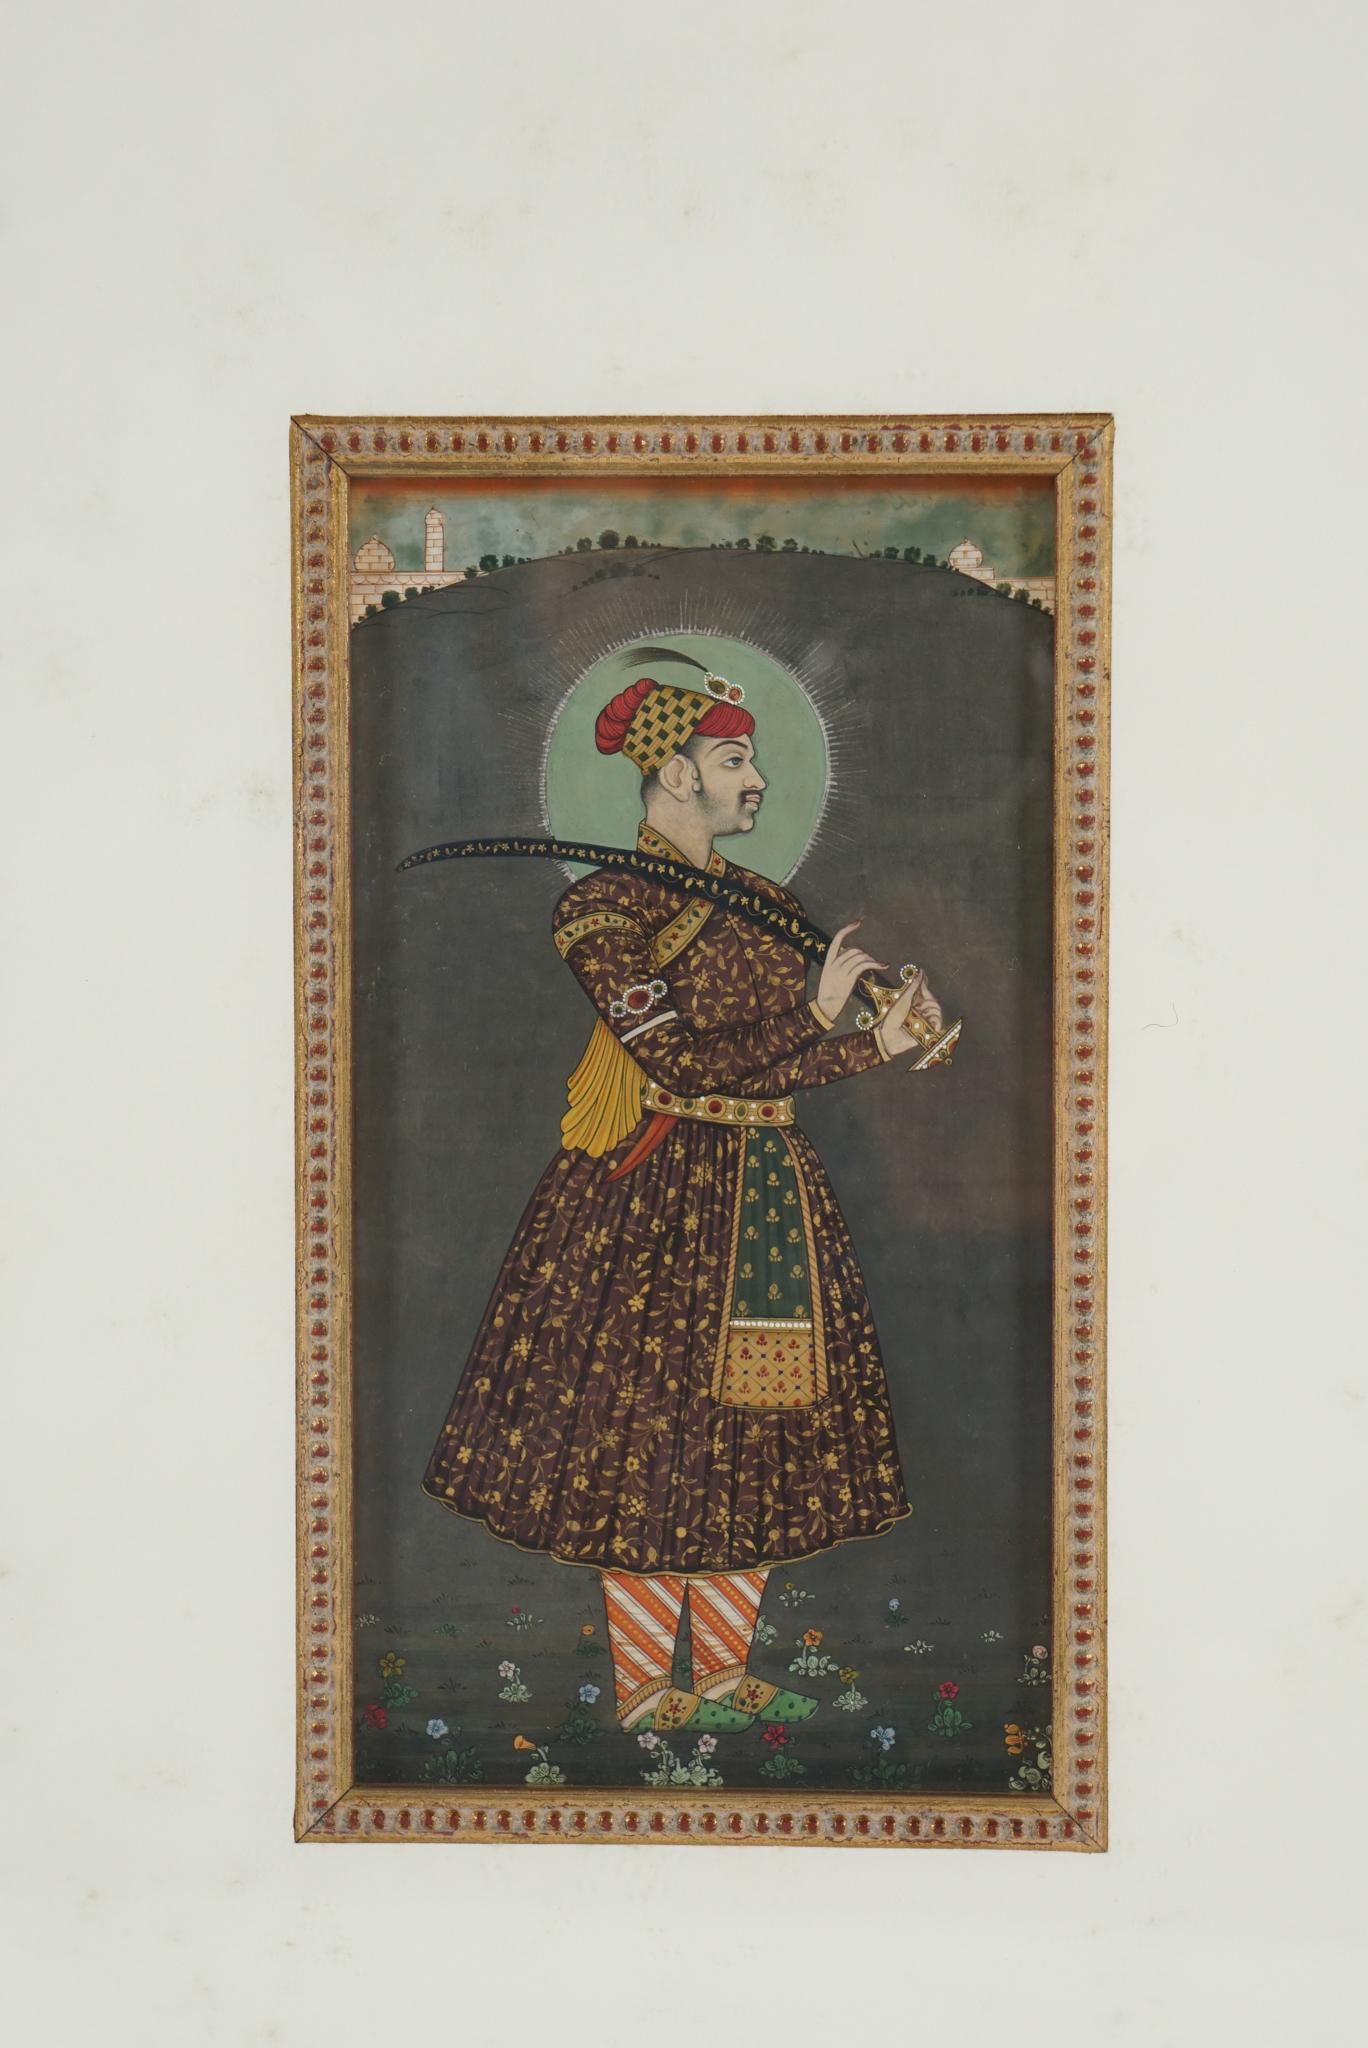 This very detailed miniature work designed to be set into an album of works for private viewing is of the Great Moghul Emperor Shah Jahan and was painted in about 1780. Born into the great dynasty that ruled India descendant of Tamburlaine and